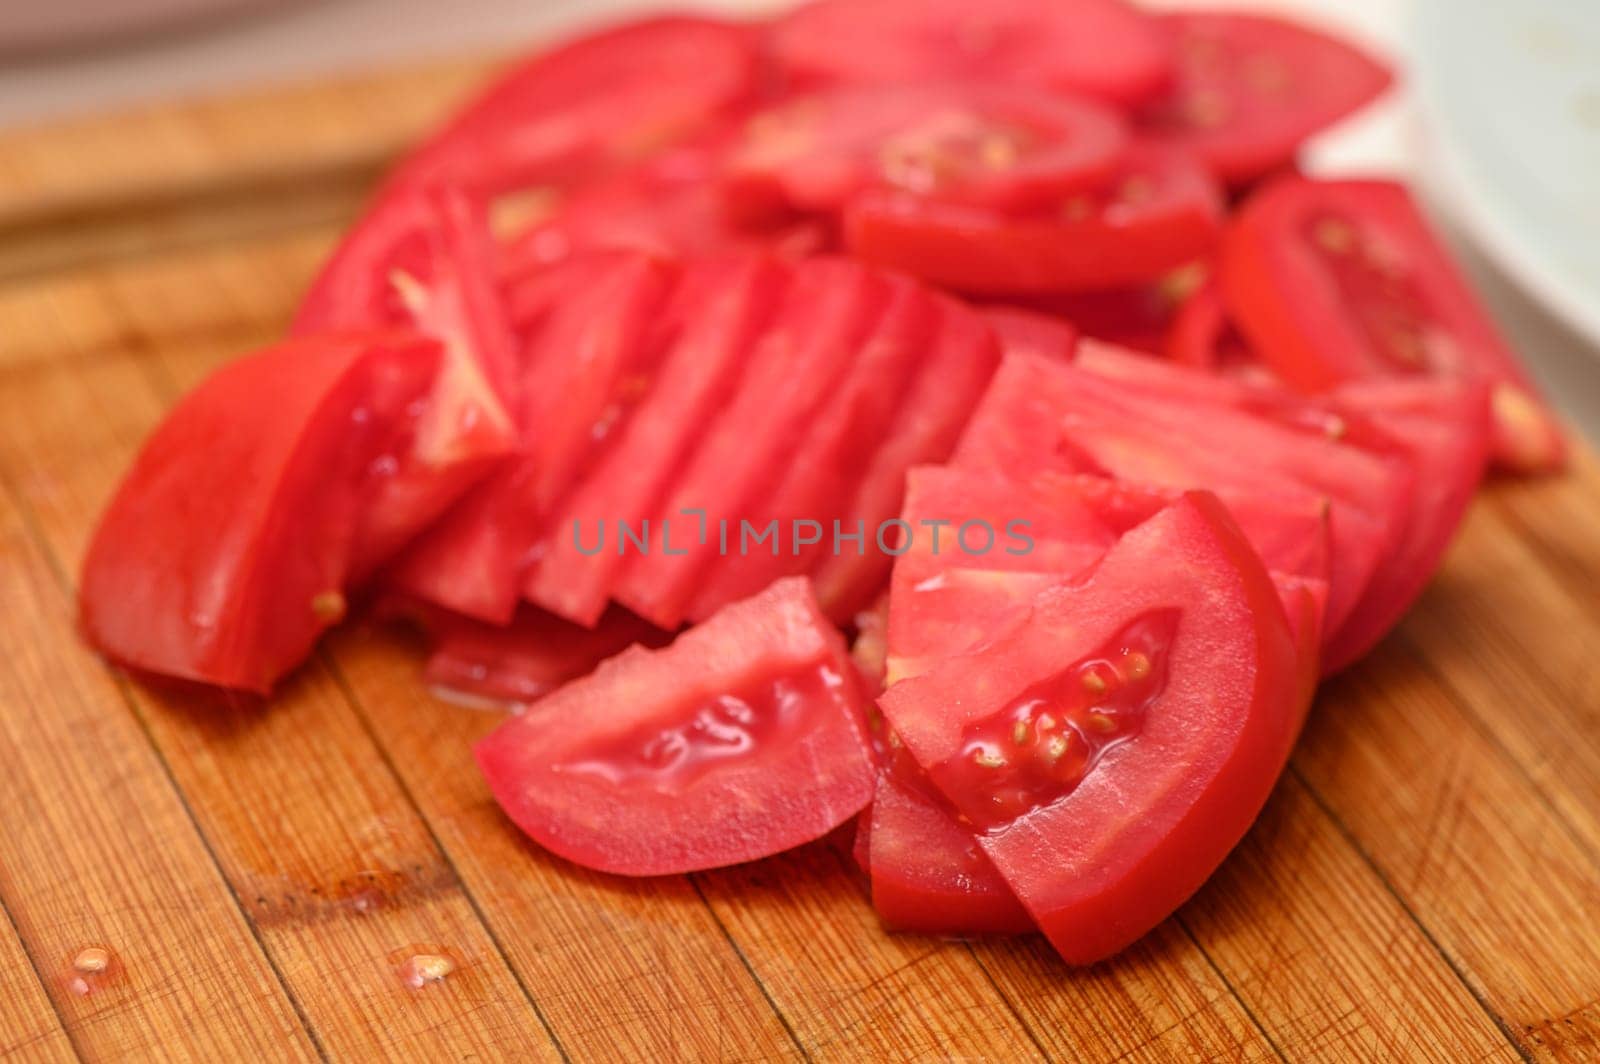 woman cutting tomato on kitchen board 9 by Mixa74